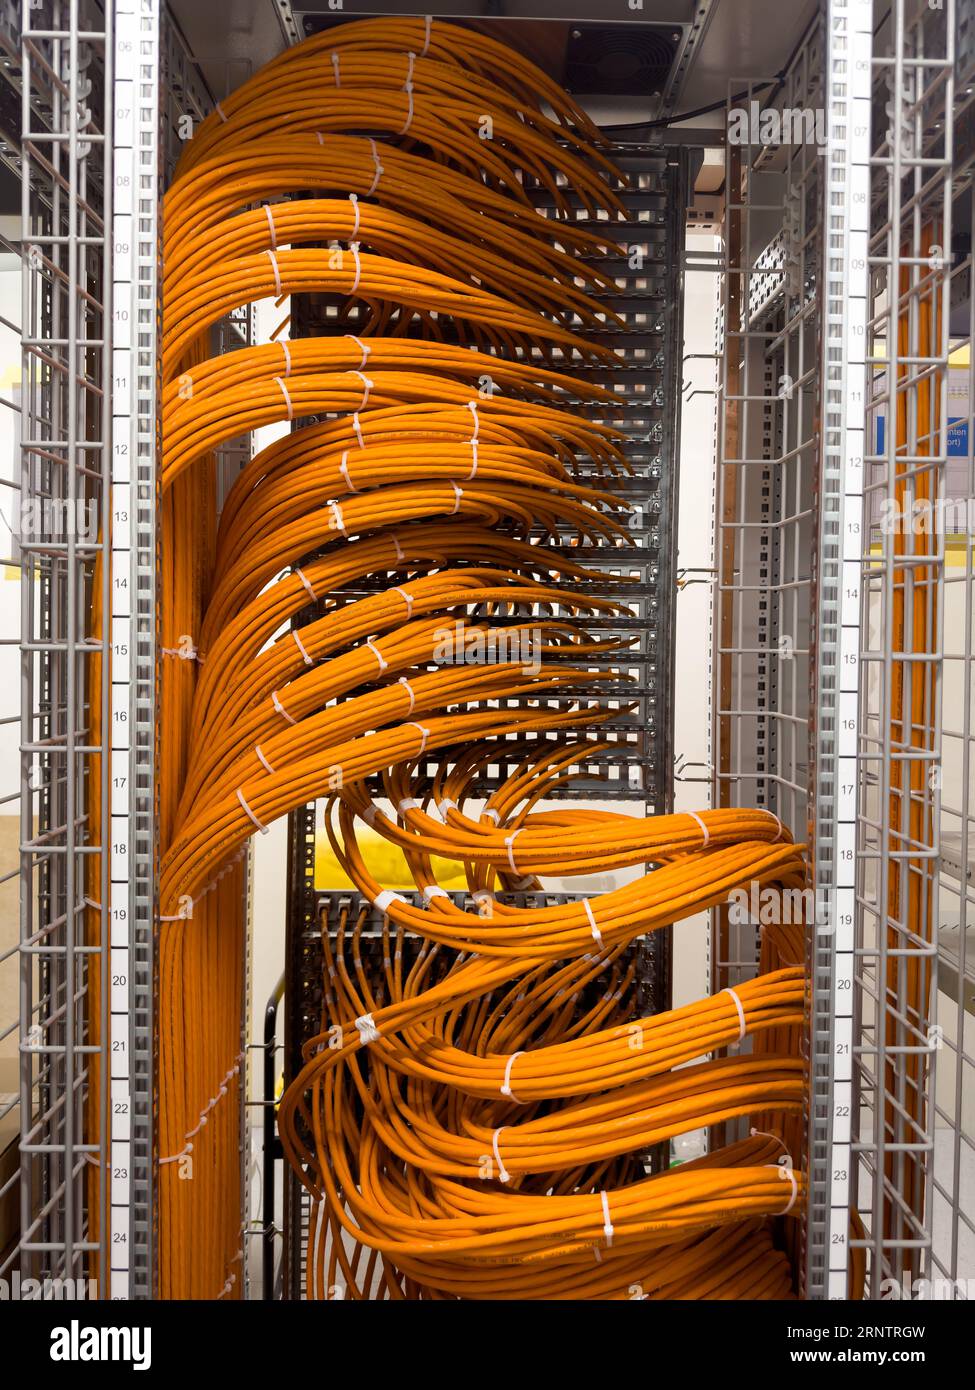 Fiber optic cables in a network rack Stock Photo